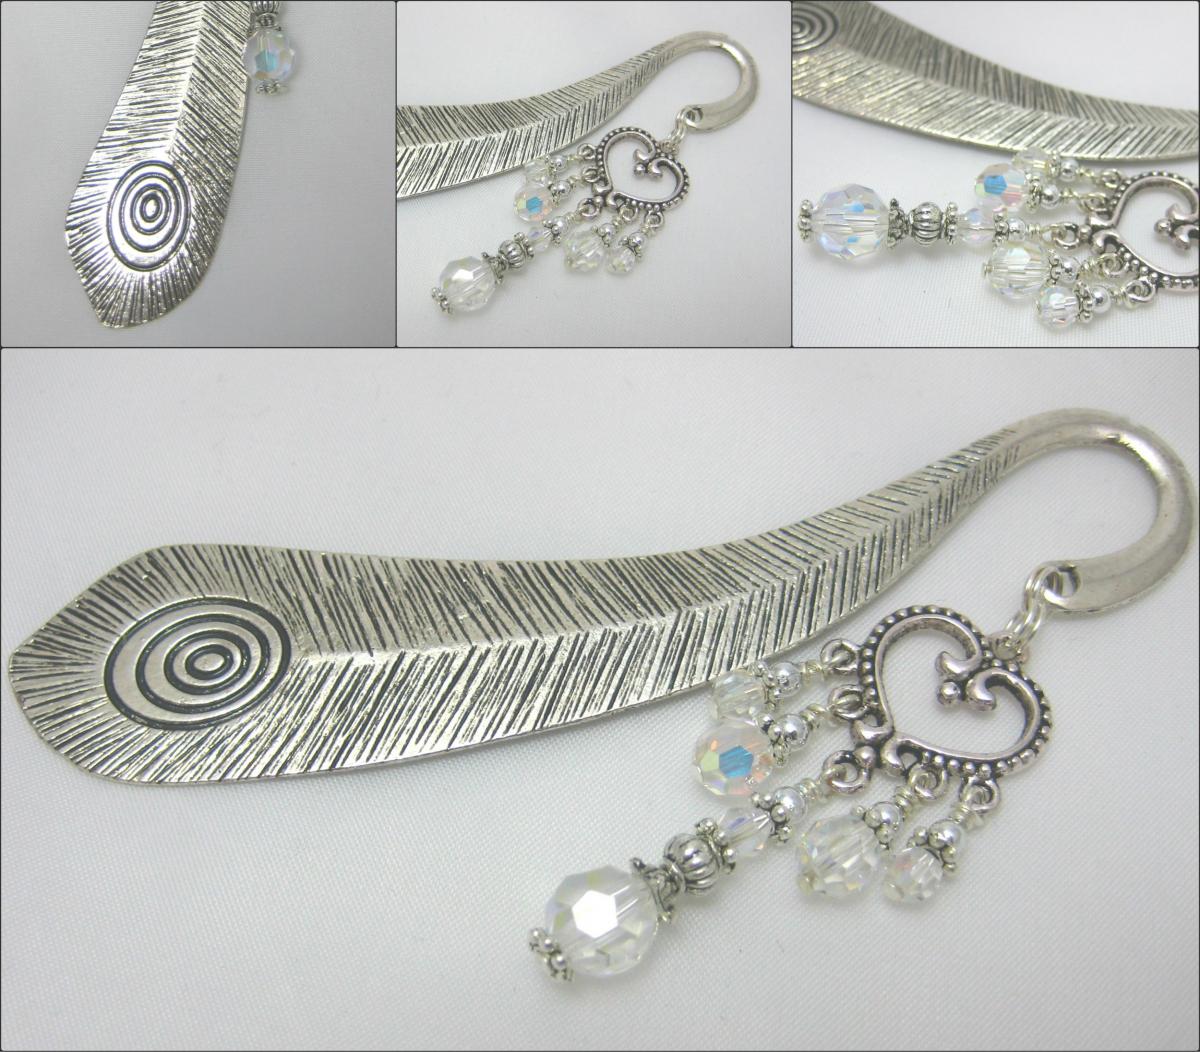 Large Peacock Feather Effect Book Mark With Sparkling Clear Crystal Chandelier Detail